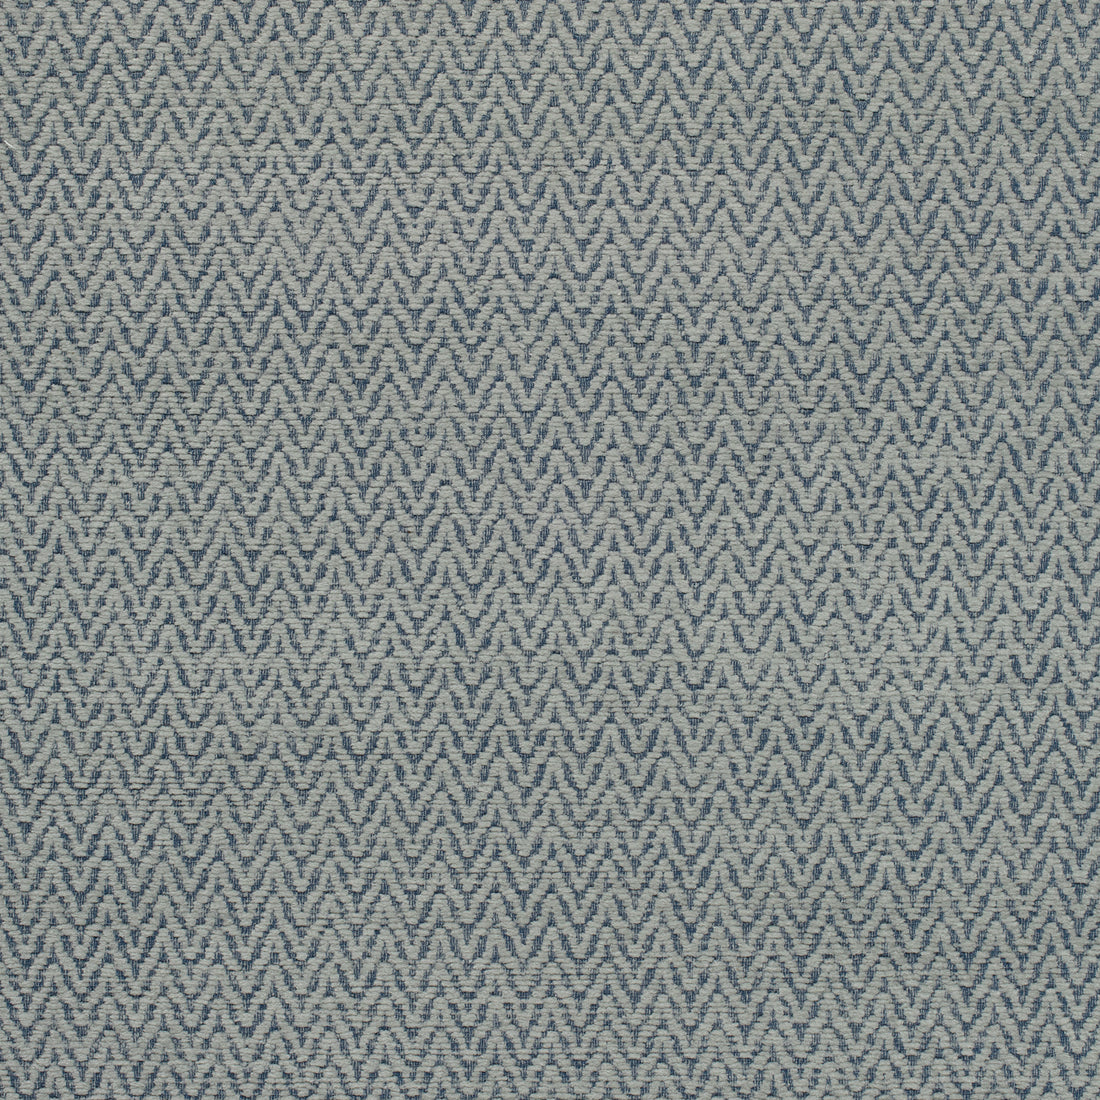 Beatrix fabric in slate color - pattern number W80603 - by Thibaut in the Pinnacle collection